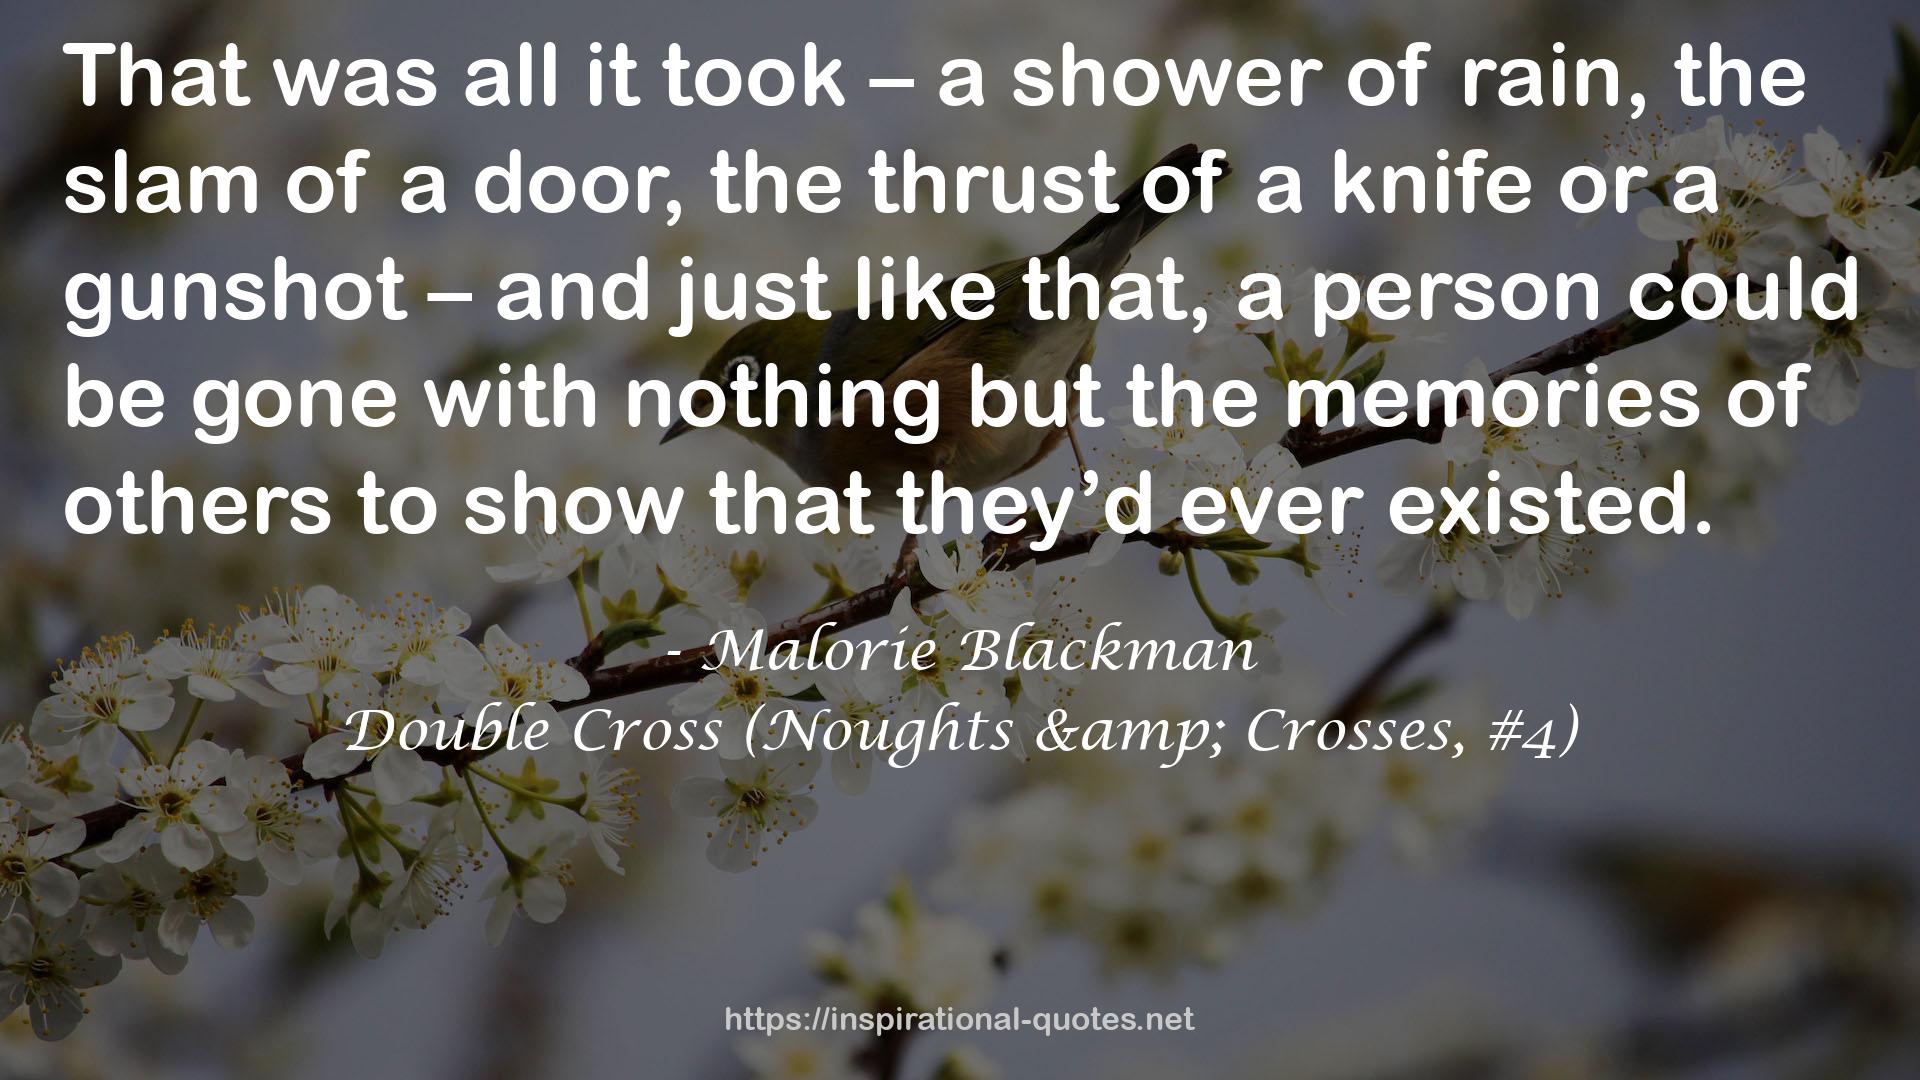 Double Cross (Noughts & Crosses, #4) QUOTES